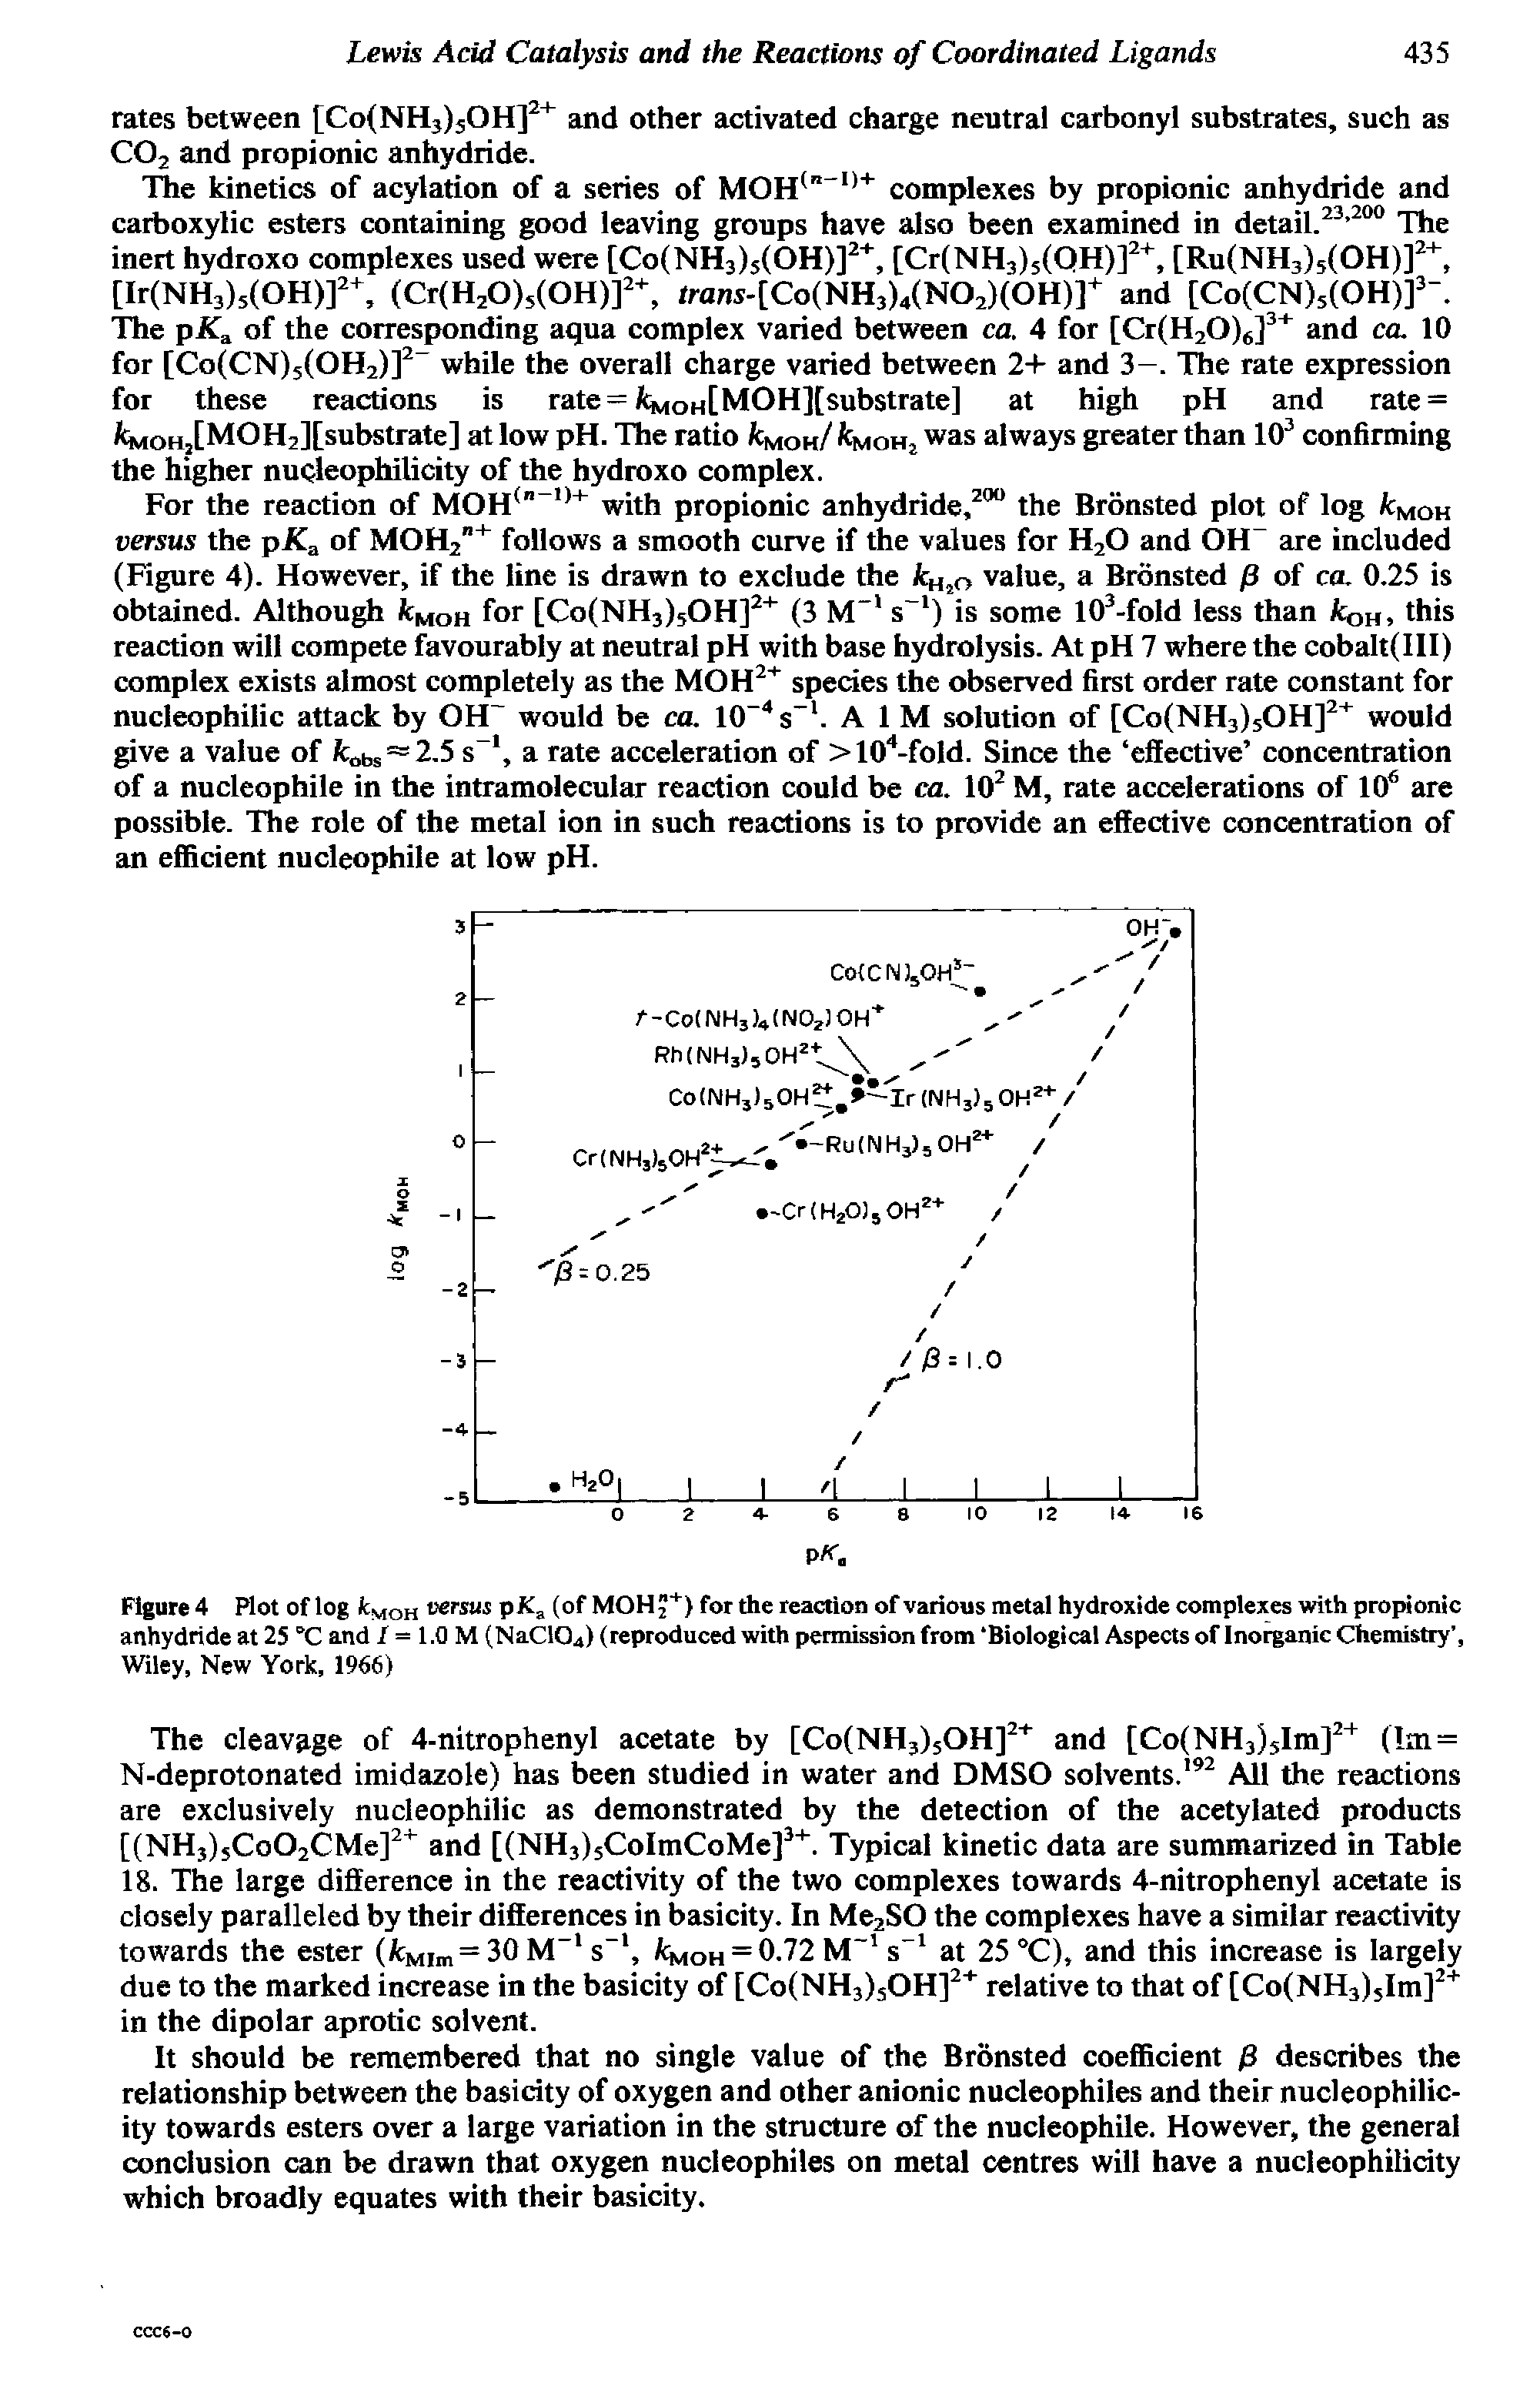 Figure 4 Plot of log kMOH uersus pKa (of MOH +) for the reaction of various metal hydroxide complexes with propionic anhydride at 25 °C and / = 1.0 M (NaC104) (reproduced with permission from biological Aspects of Inorganic Chemistry , Wiley, New York, 1966)...